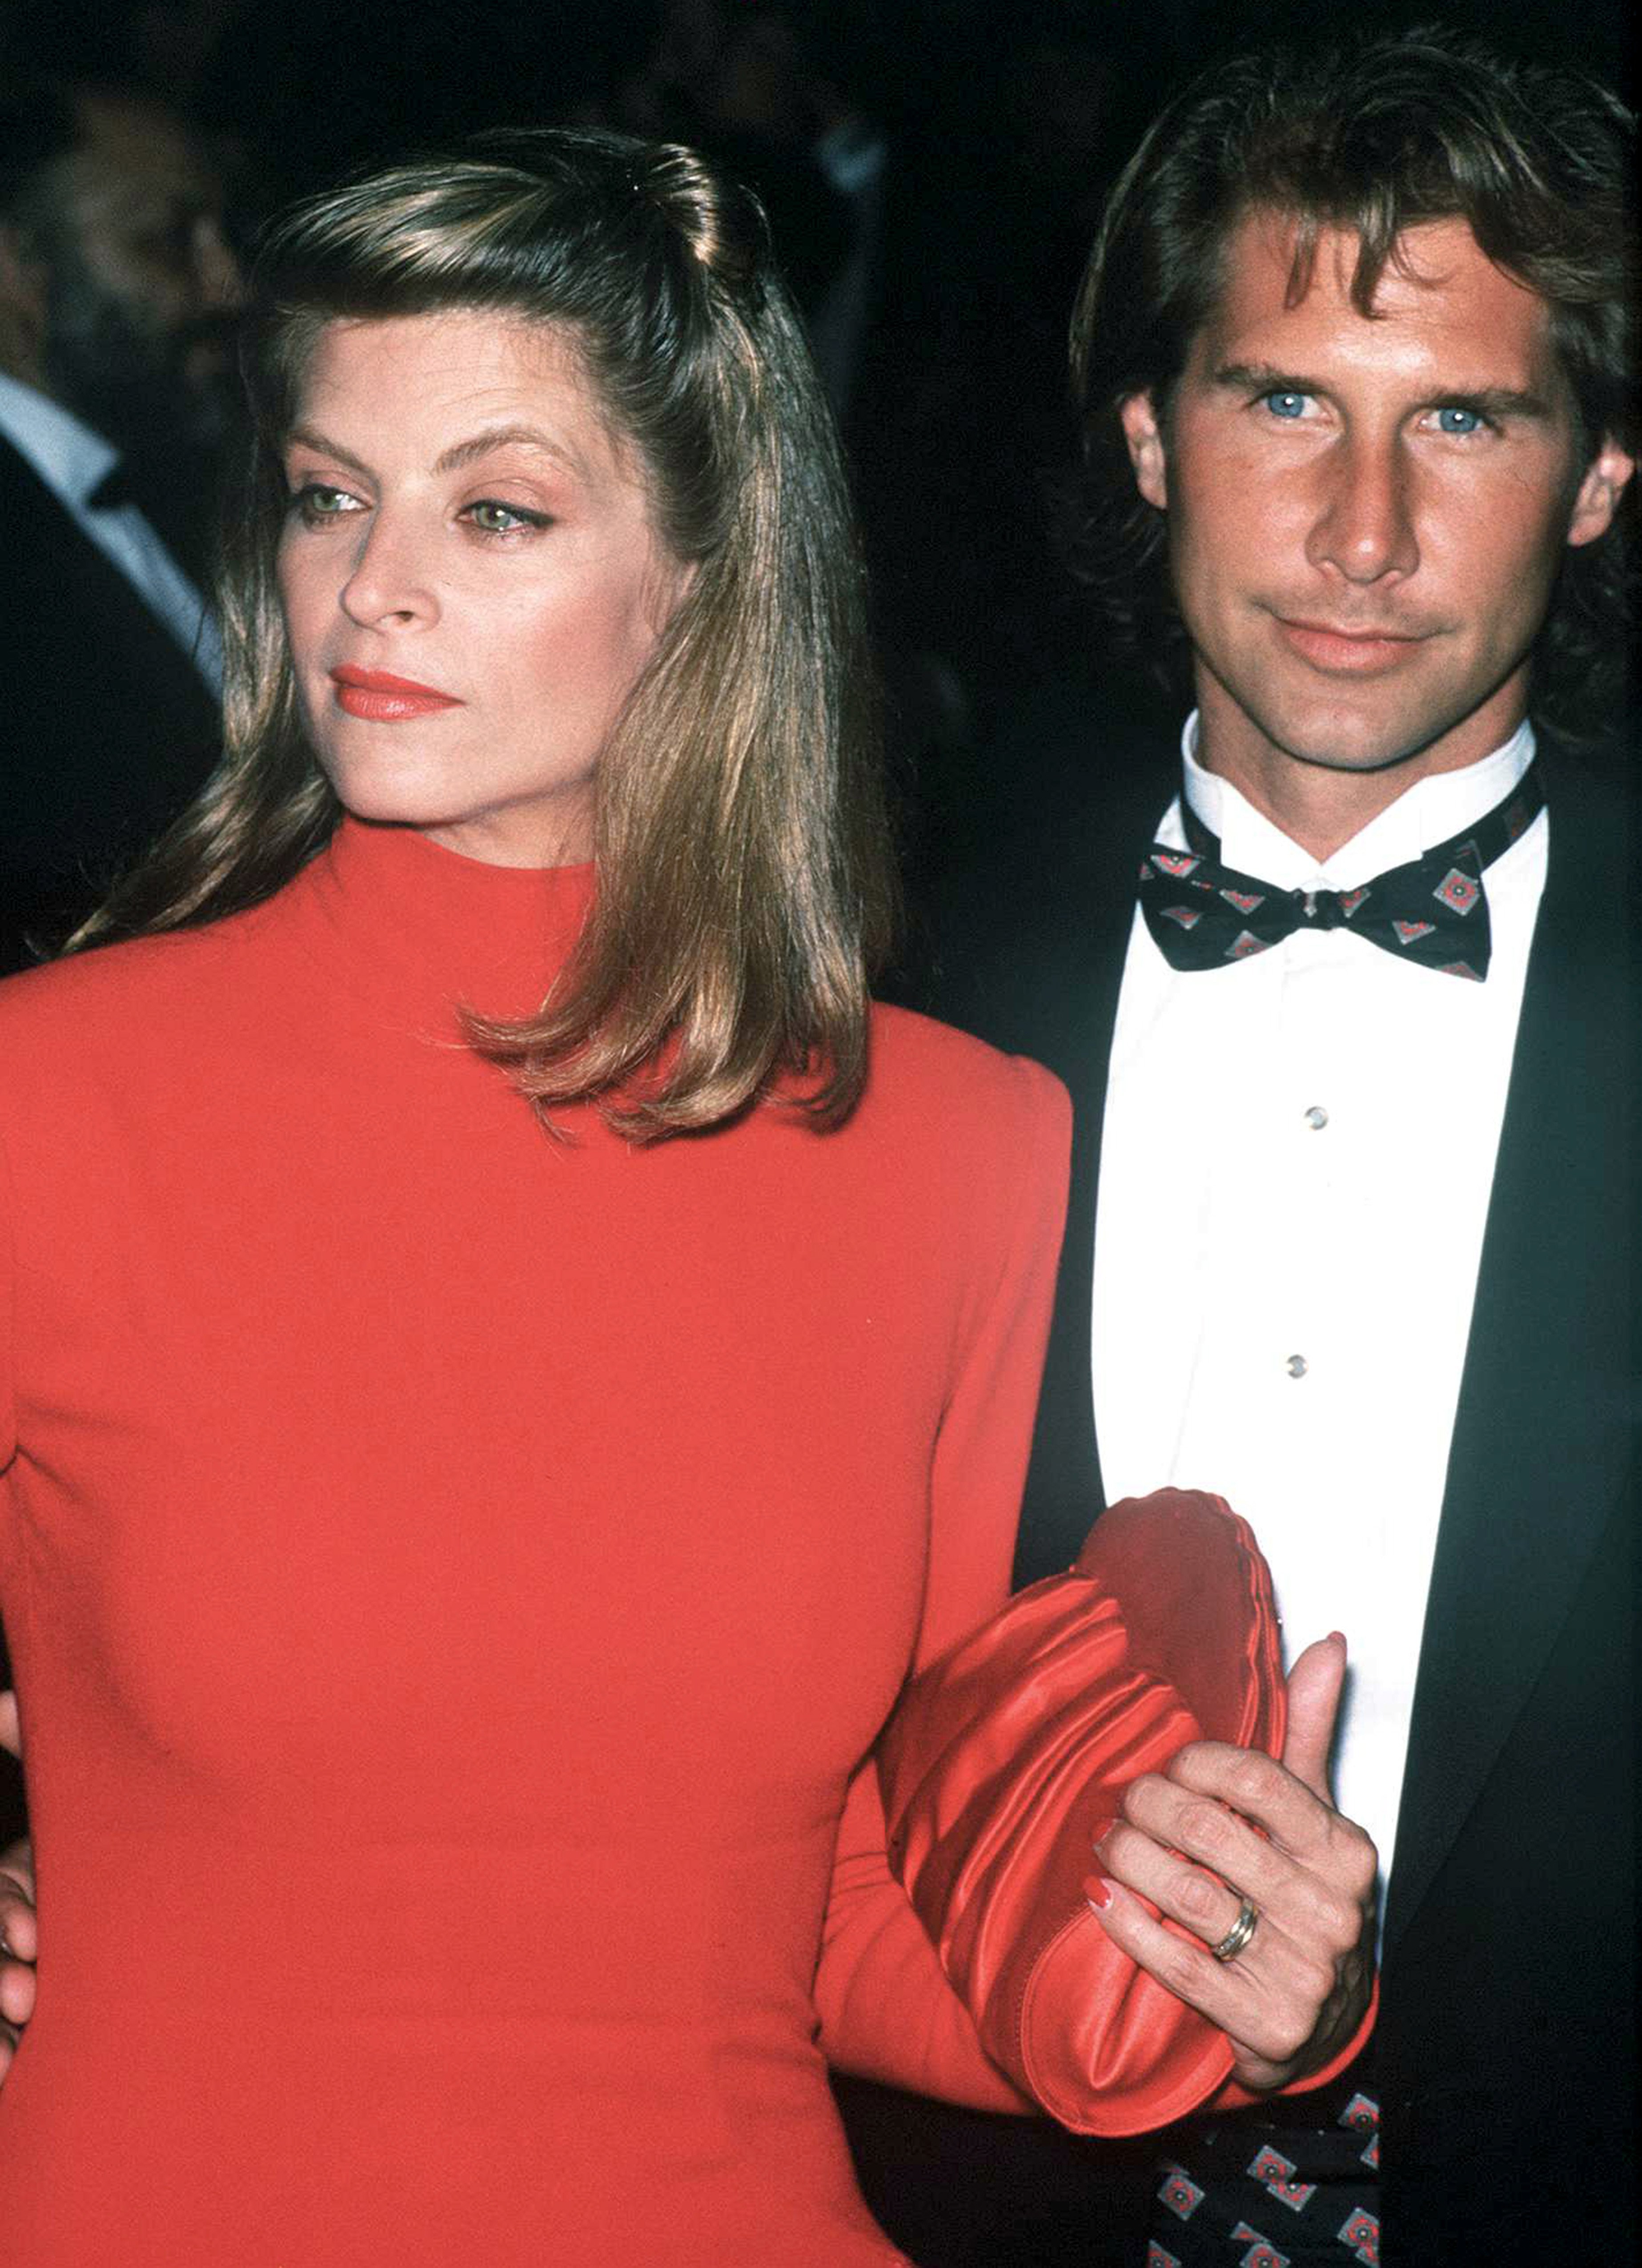 American actress Kirstie Alley with her husband, actor Parker Stevenson, circa 1990. | Source: Getty Images